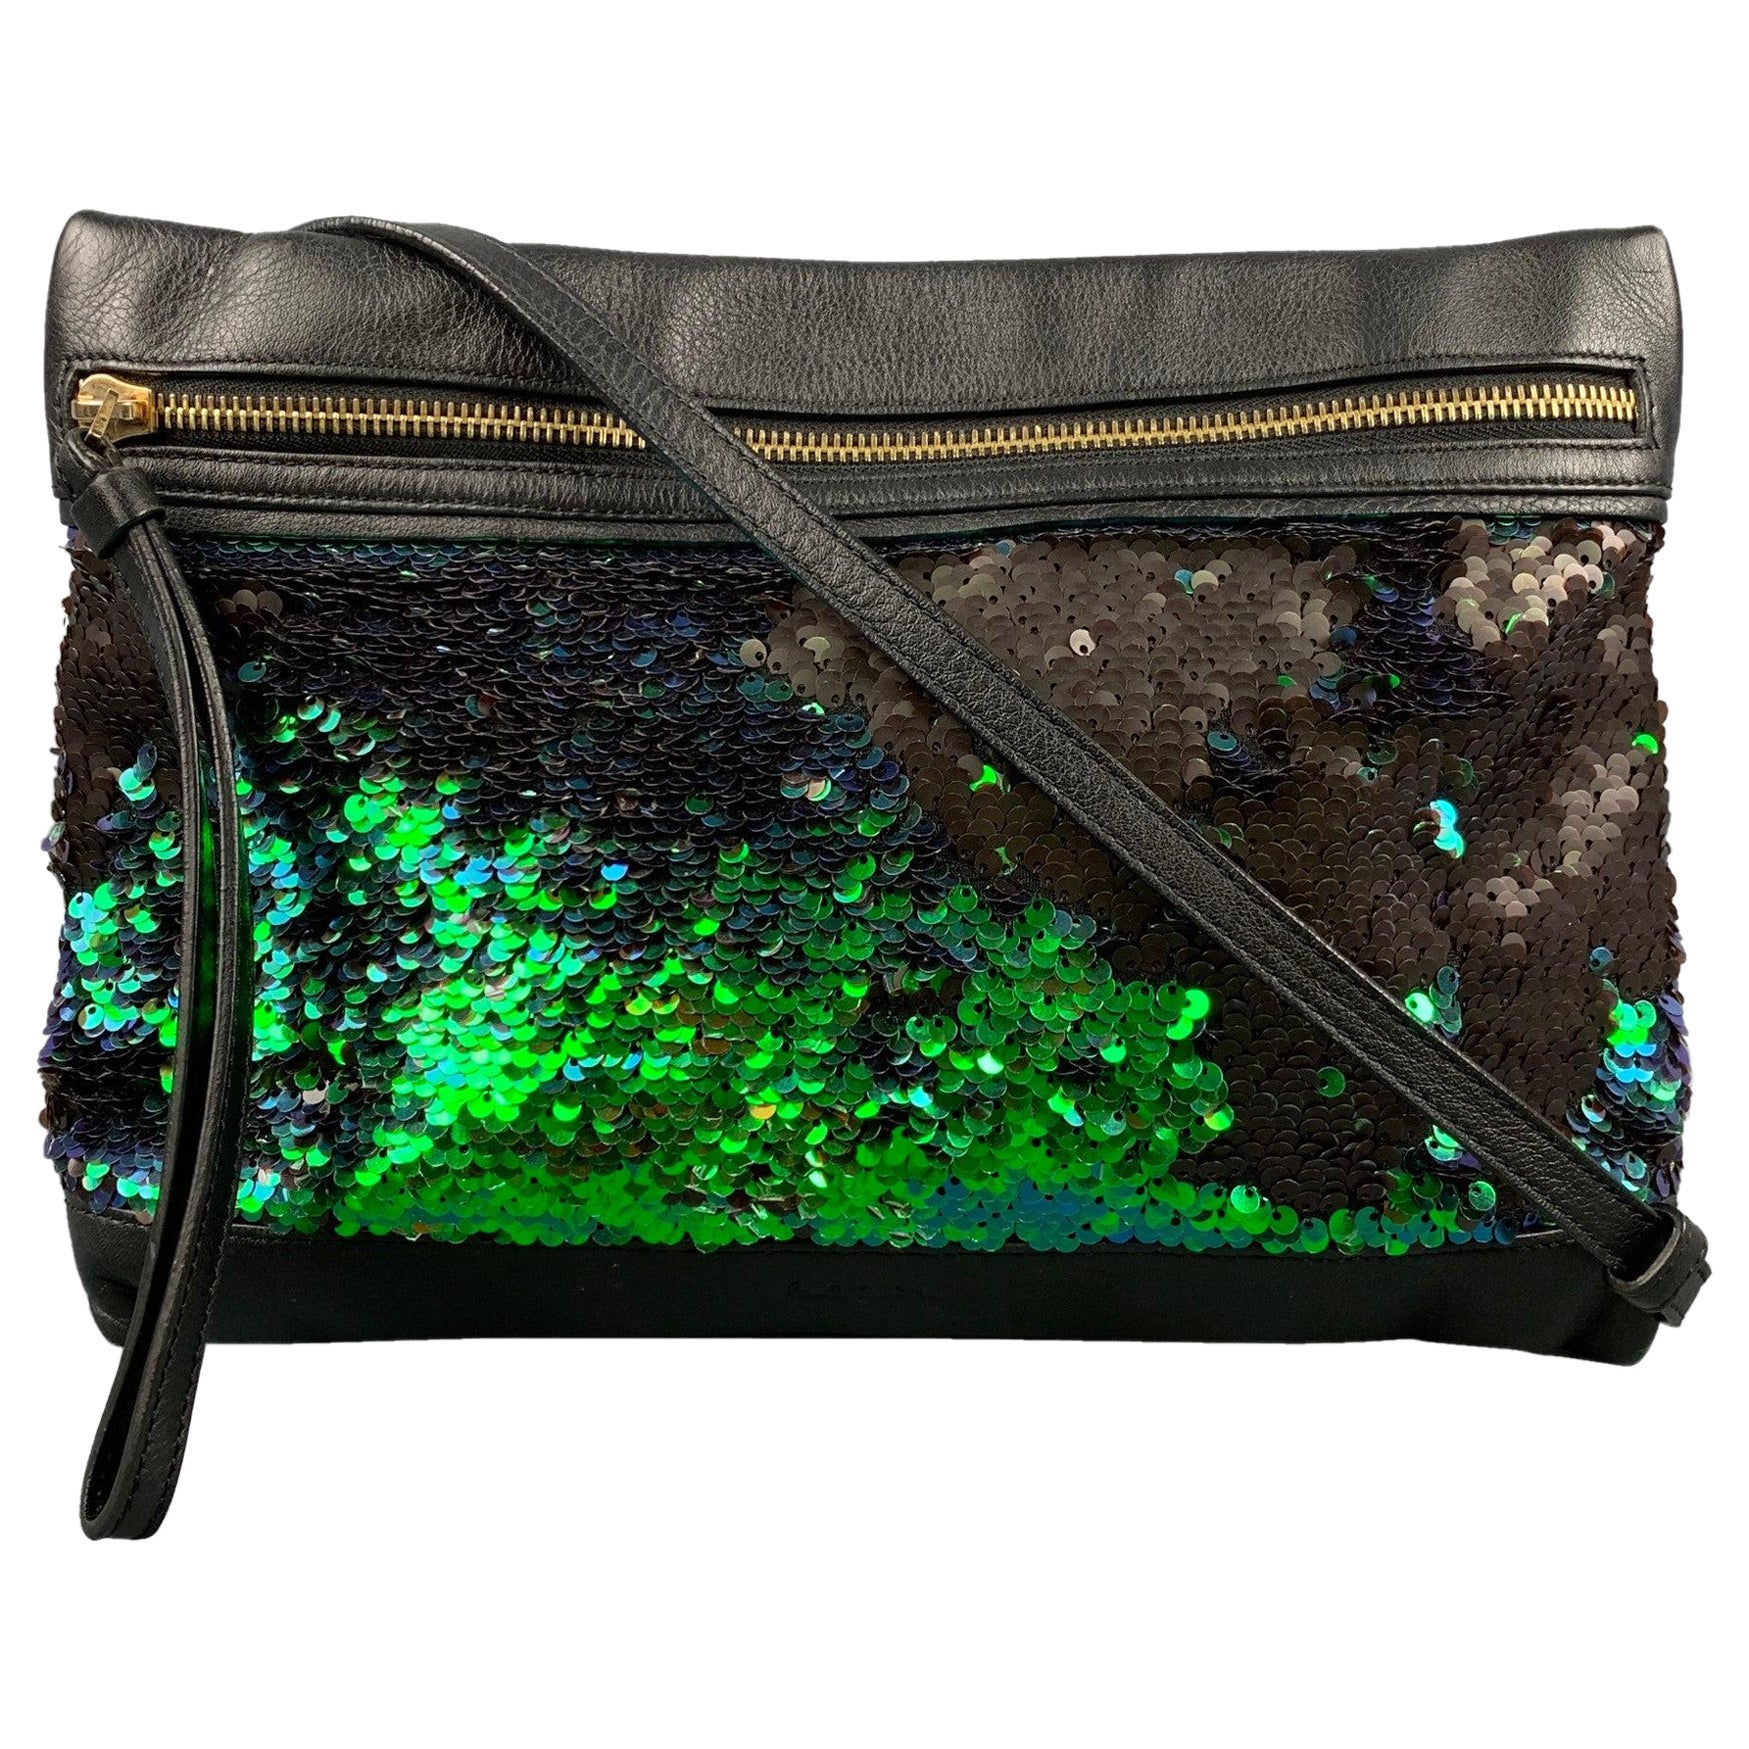 PAUL SMITH Black Green Sequined Leather Cross Body Handbag For Sale